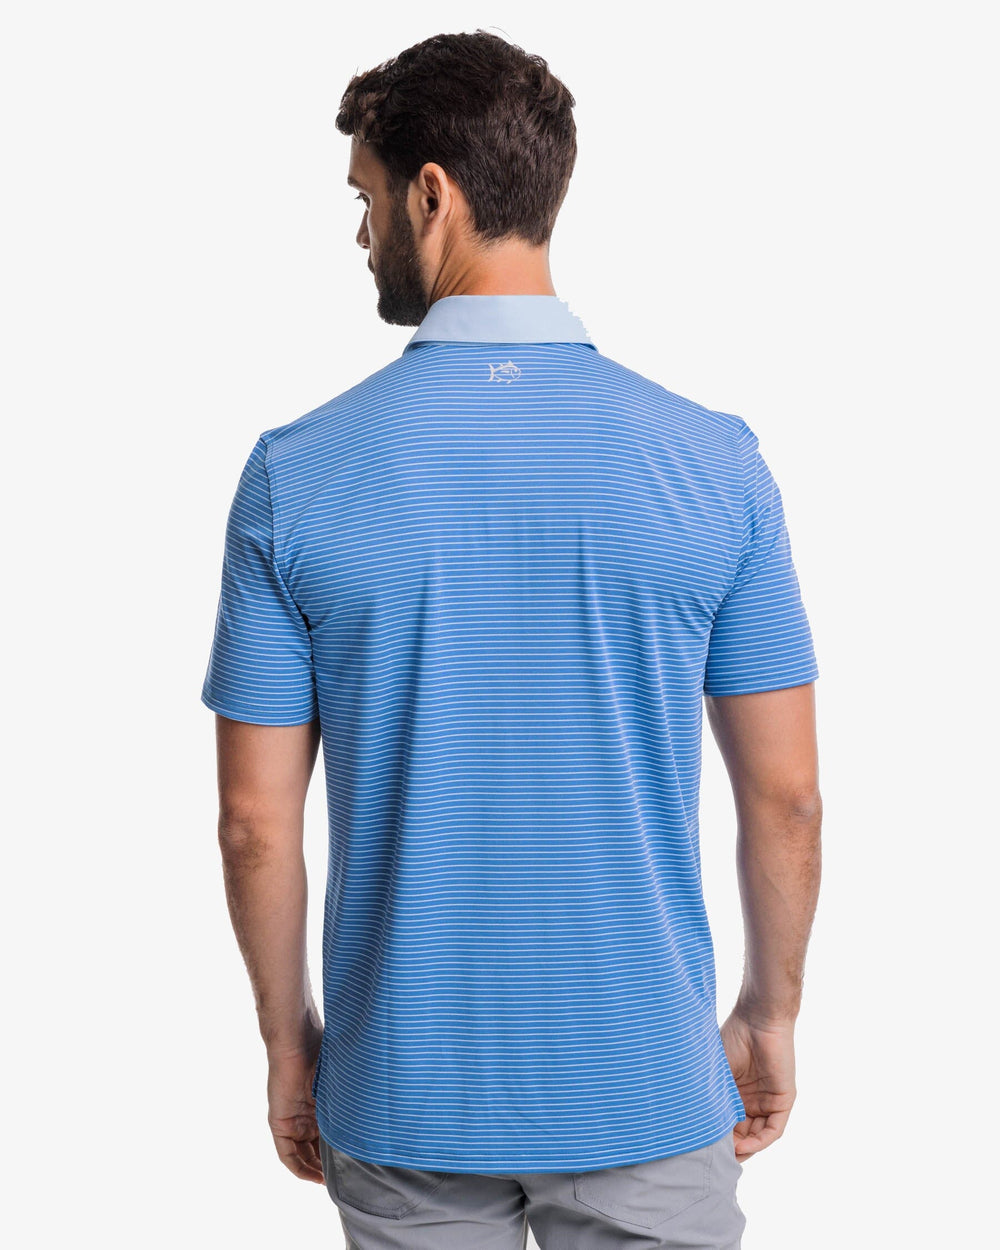 The back view of the Southern Tide Driver Bowee Stripe Performance Polo Shirt by Southern Tide - Atlantic Blue